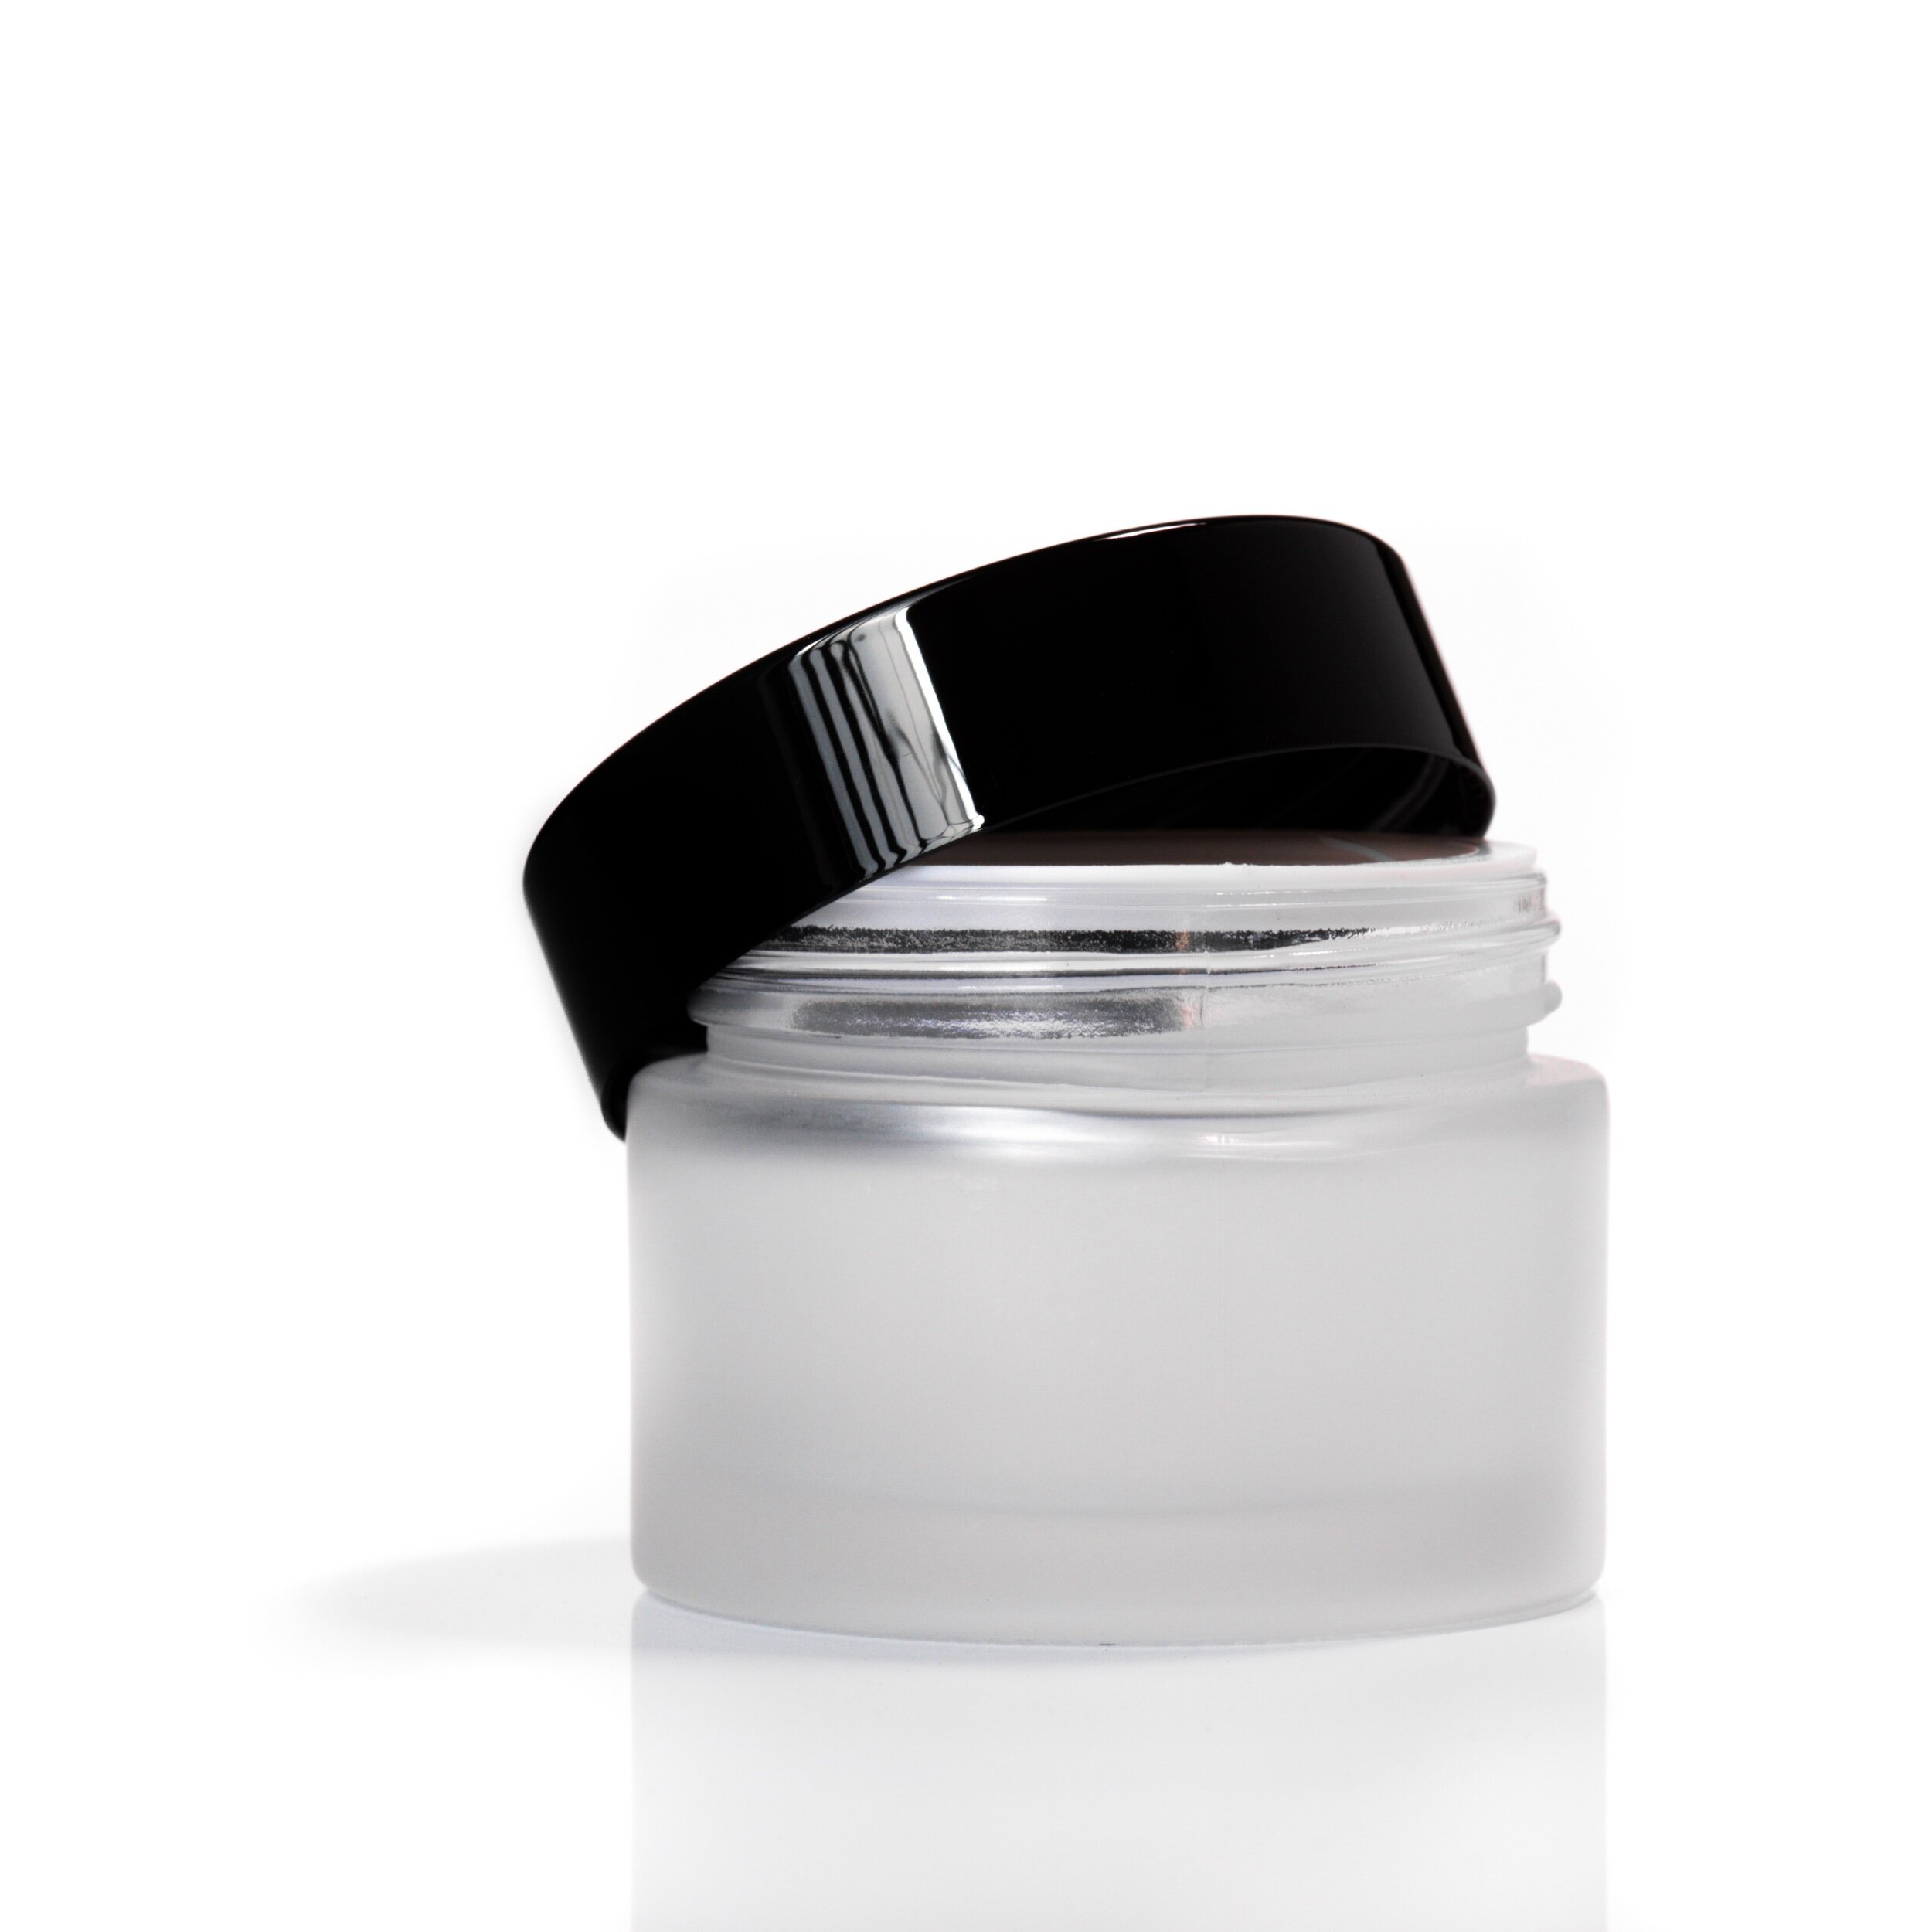 50ml Frosted Glass jar with black lid 4480 x 4480-2.jpeg